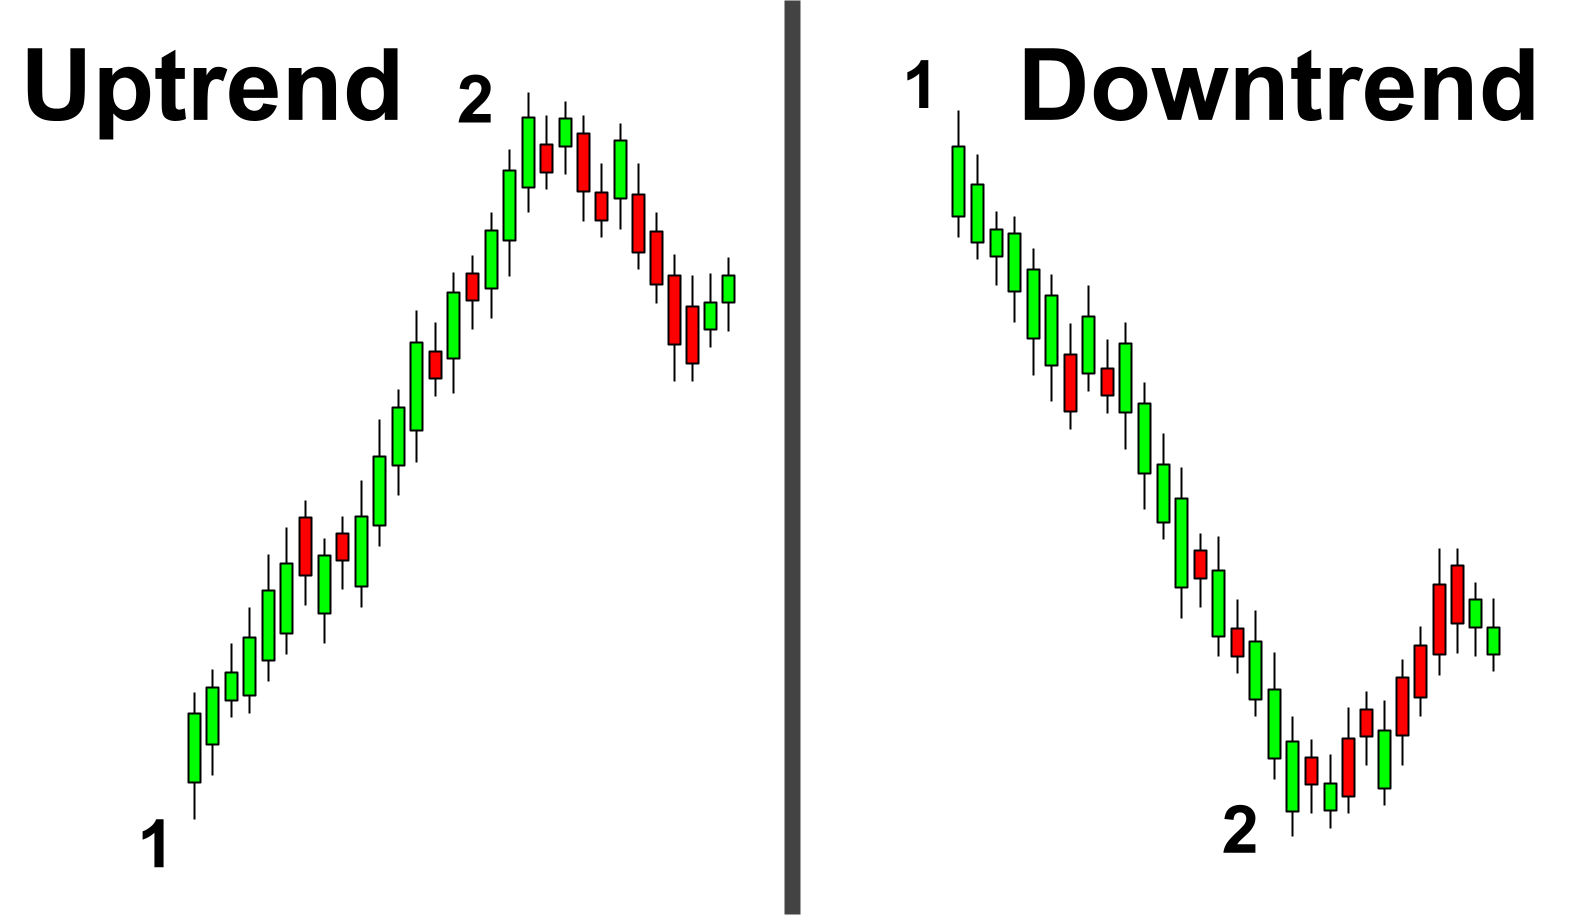 Identifying the uptrend and downtrend to draw Fibonacci retracement lines.